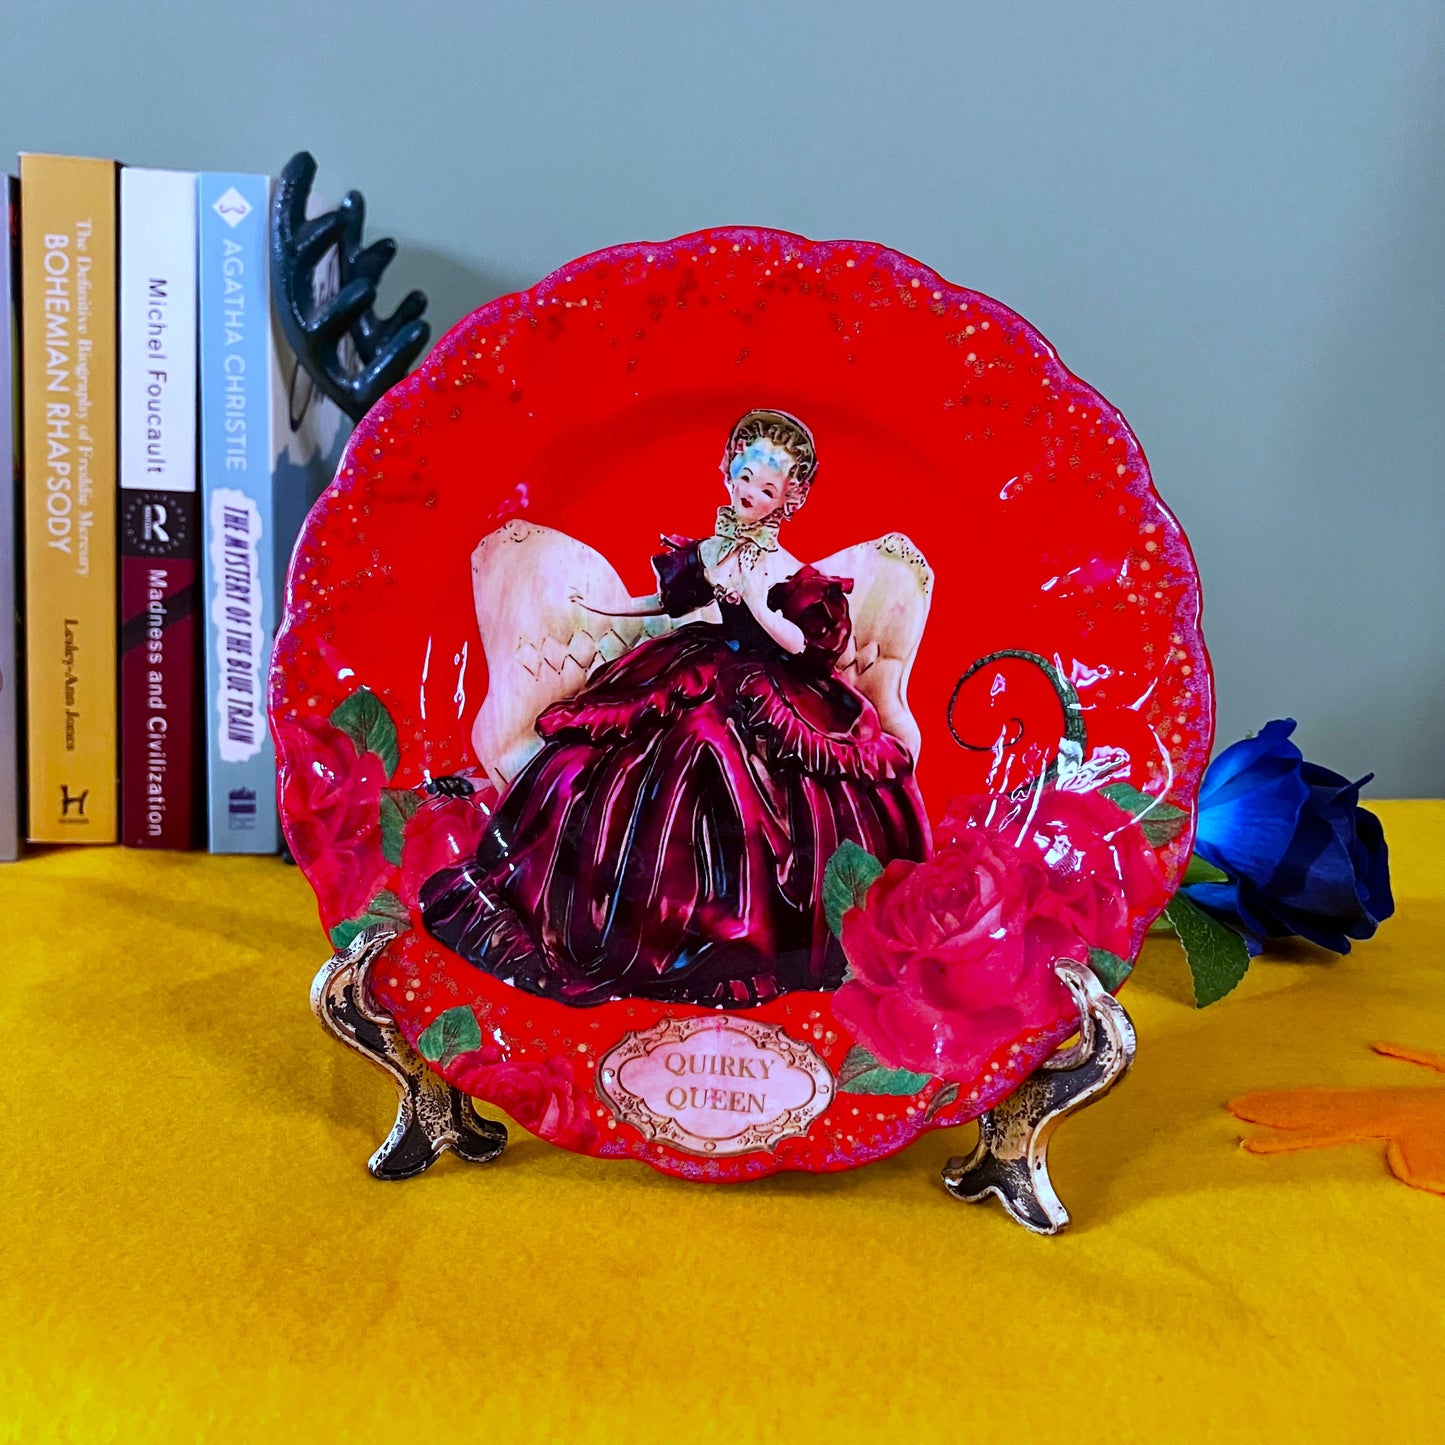 Quirky Queen Wall Plate by House of Frisson, featuring a kitsch porcelain figure of a lady surrounded by red roses and House of Frisson's creatures, against a red background. Plate on a plate stand resting on a table.